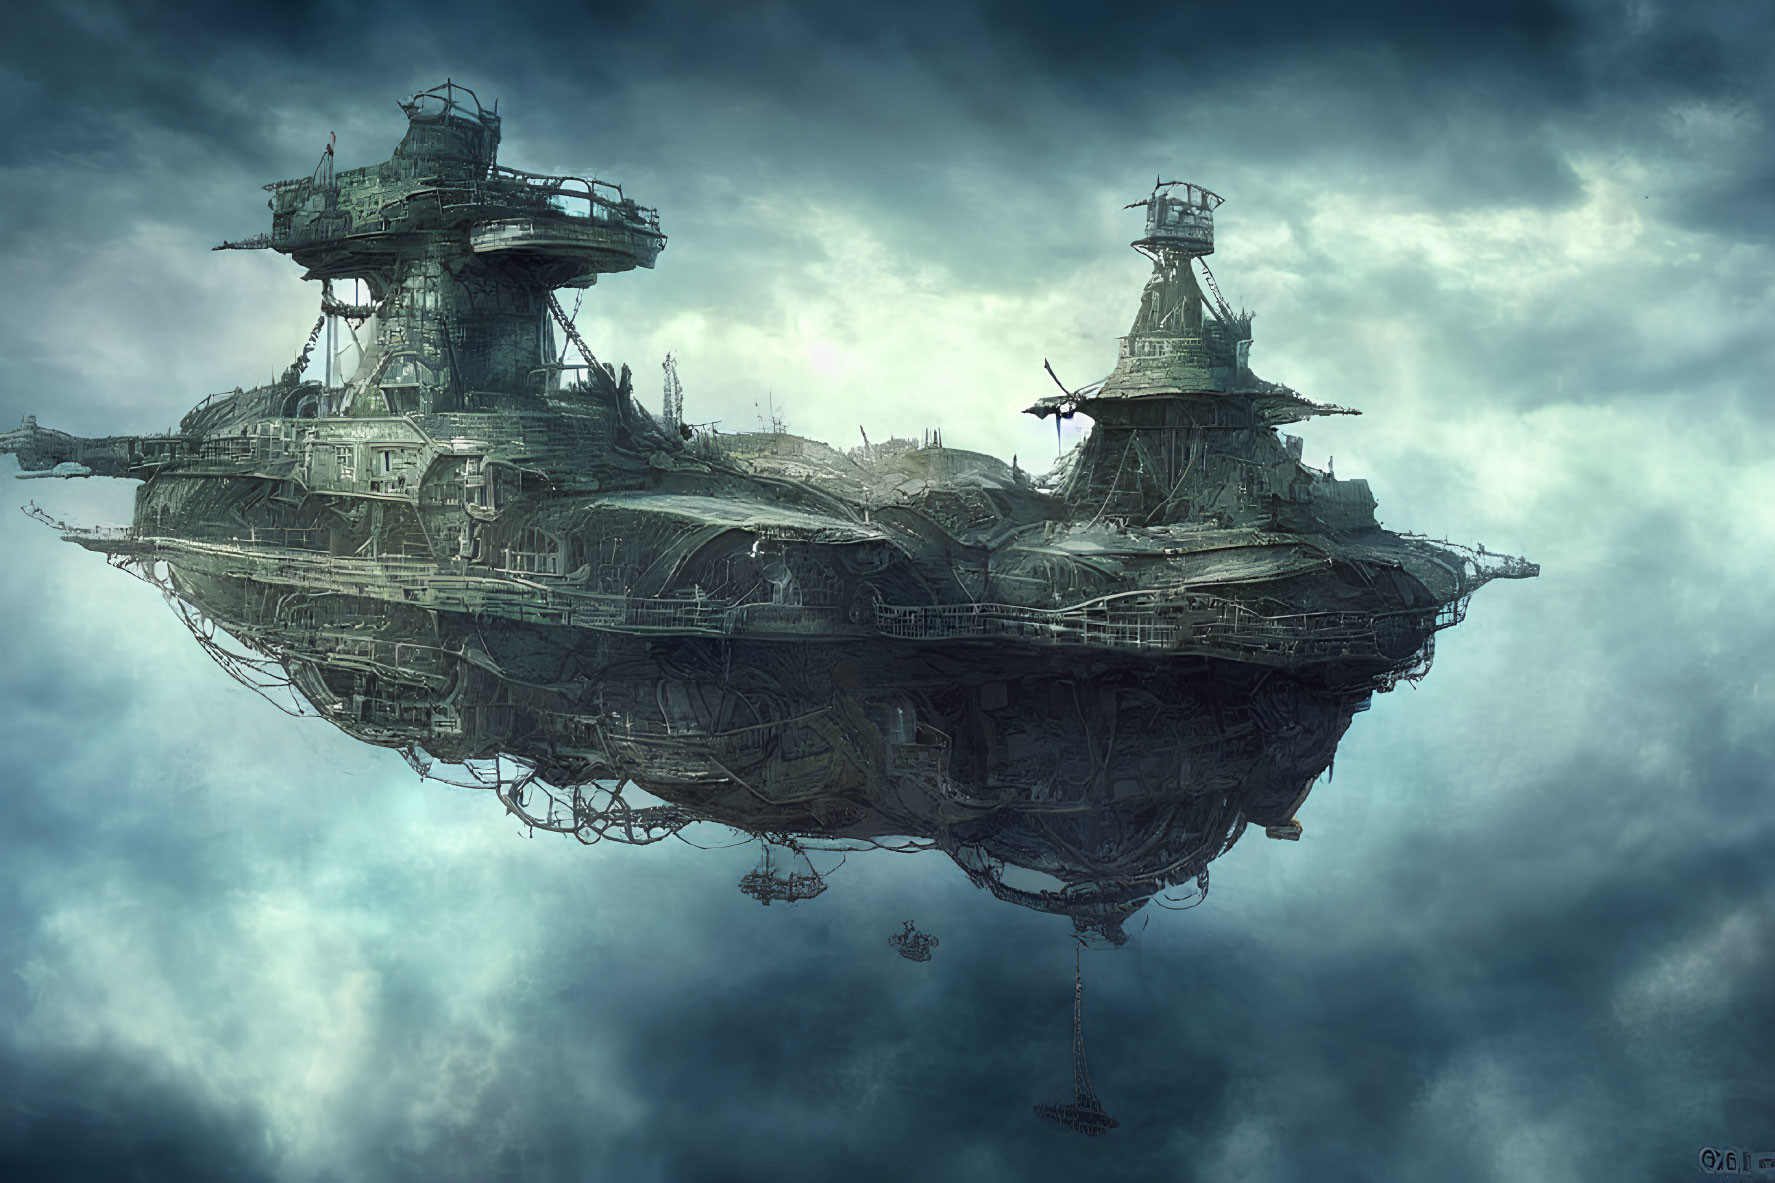 Floating steampunk-style airship with intricate metalwork in cloudy skies